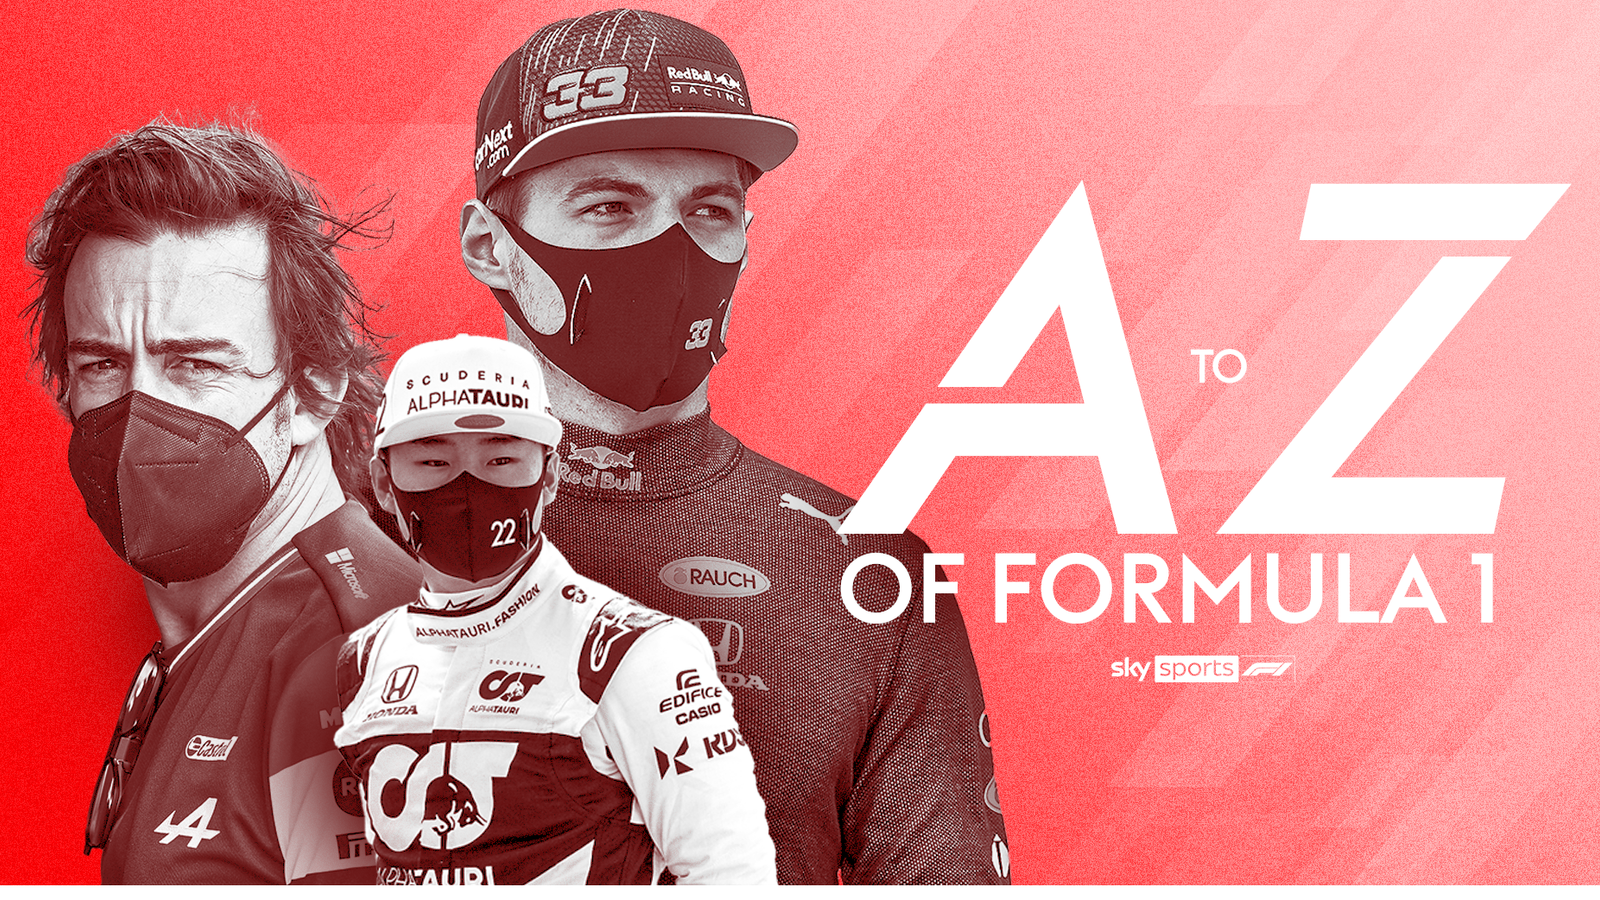 Formula 1 2021: Introducing the new season from A to Z after driver, team and rule changes